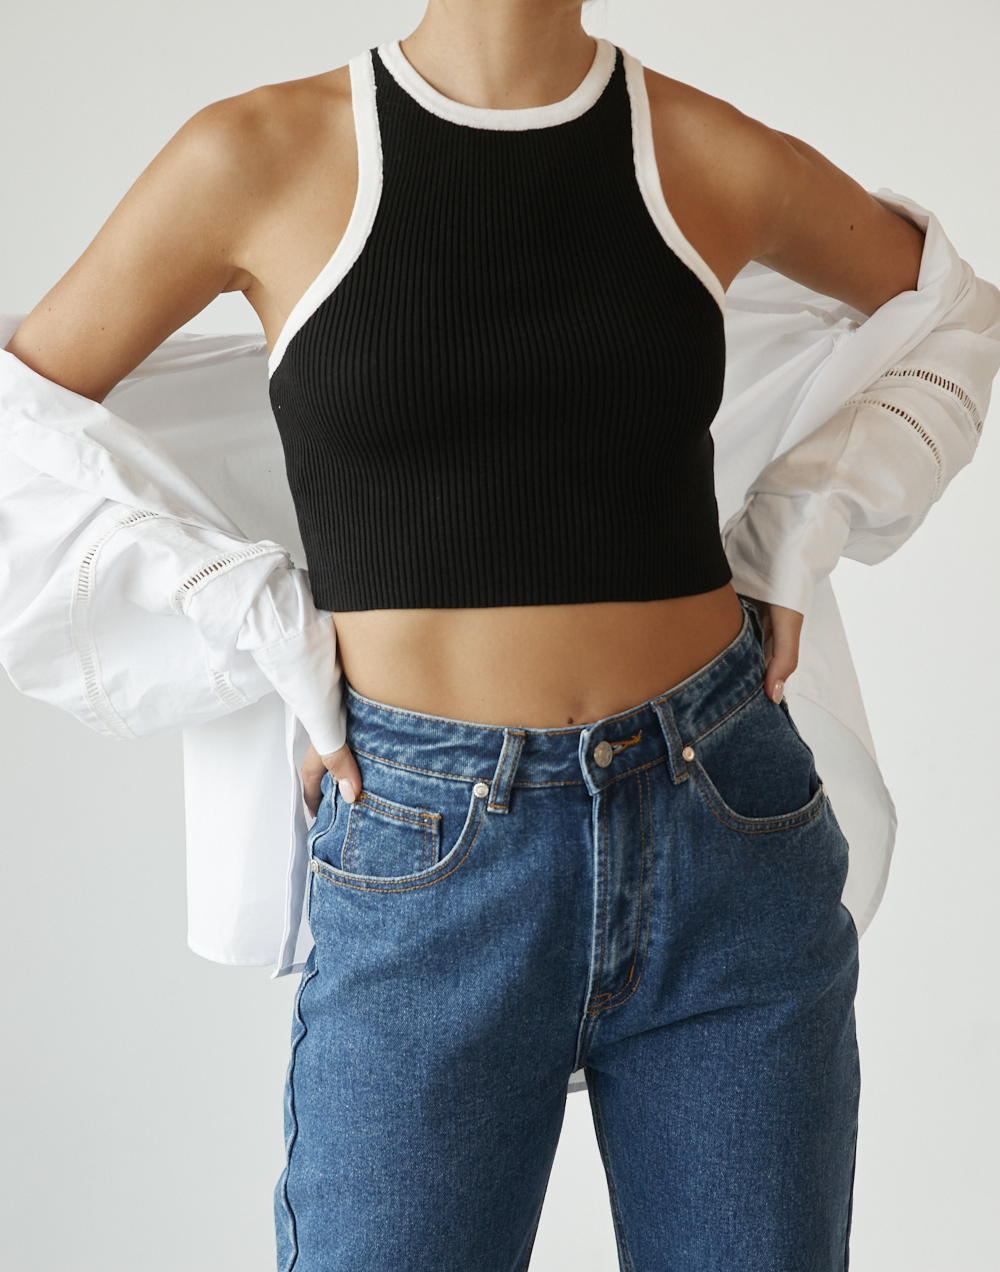 Laylani Knit Crop Top (Black/White) - Knitted Tank Top - Women's Top - Charcoal Clothing